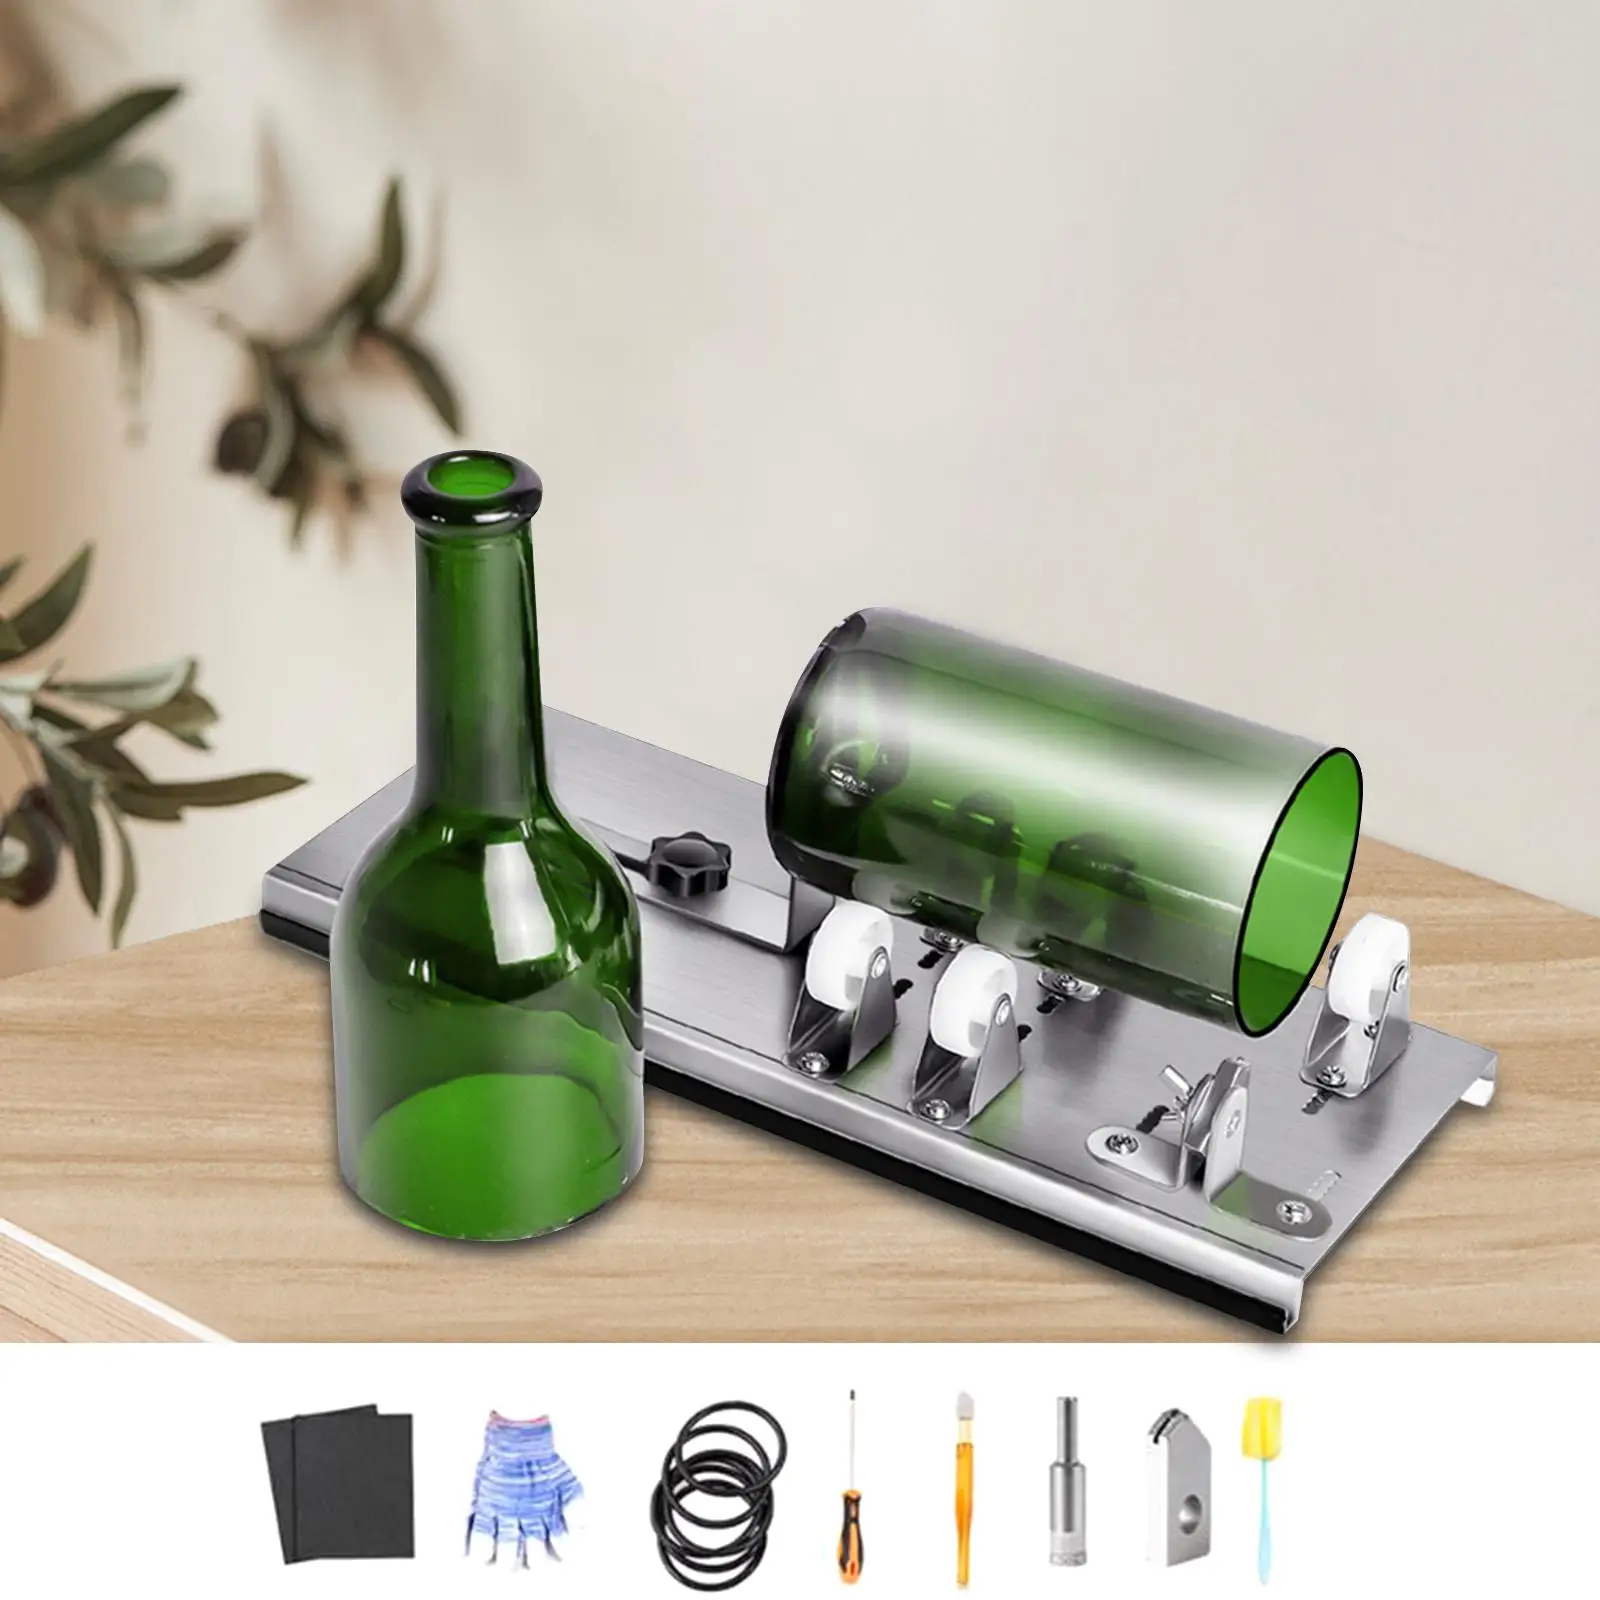 Glass Bottle Cutter Upgraded Manual Tool Durable Crafts Cutting Machine for Pen Holders DIY Flowerpot Lampshades Vases Ornaments